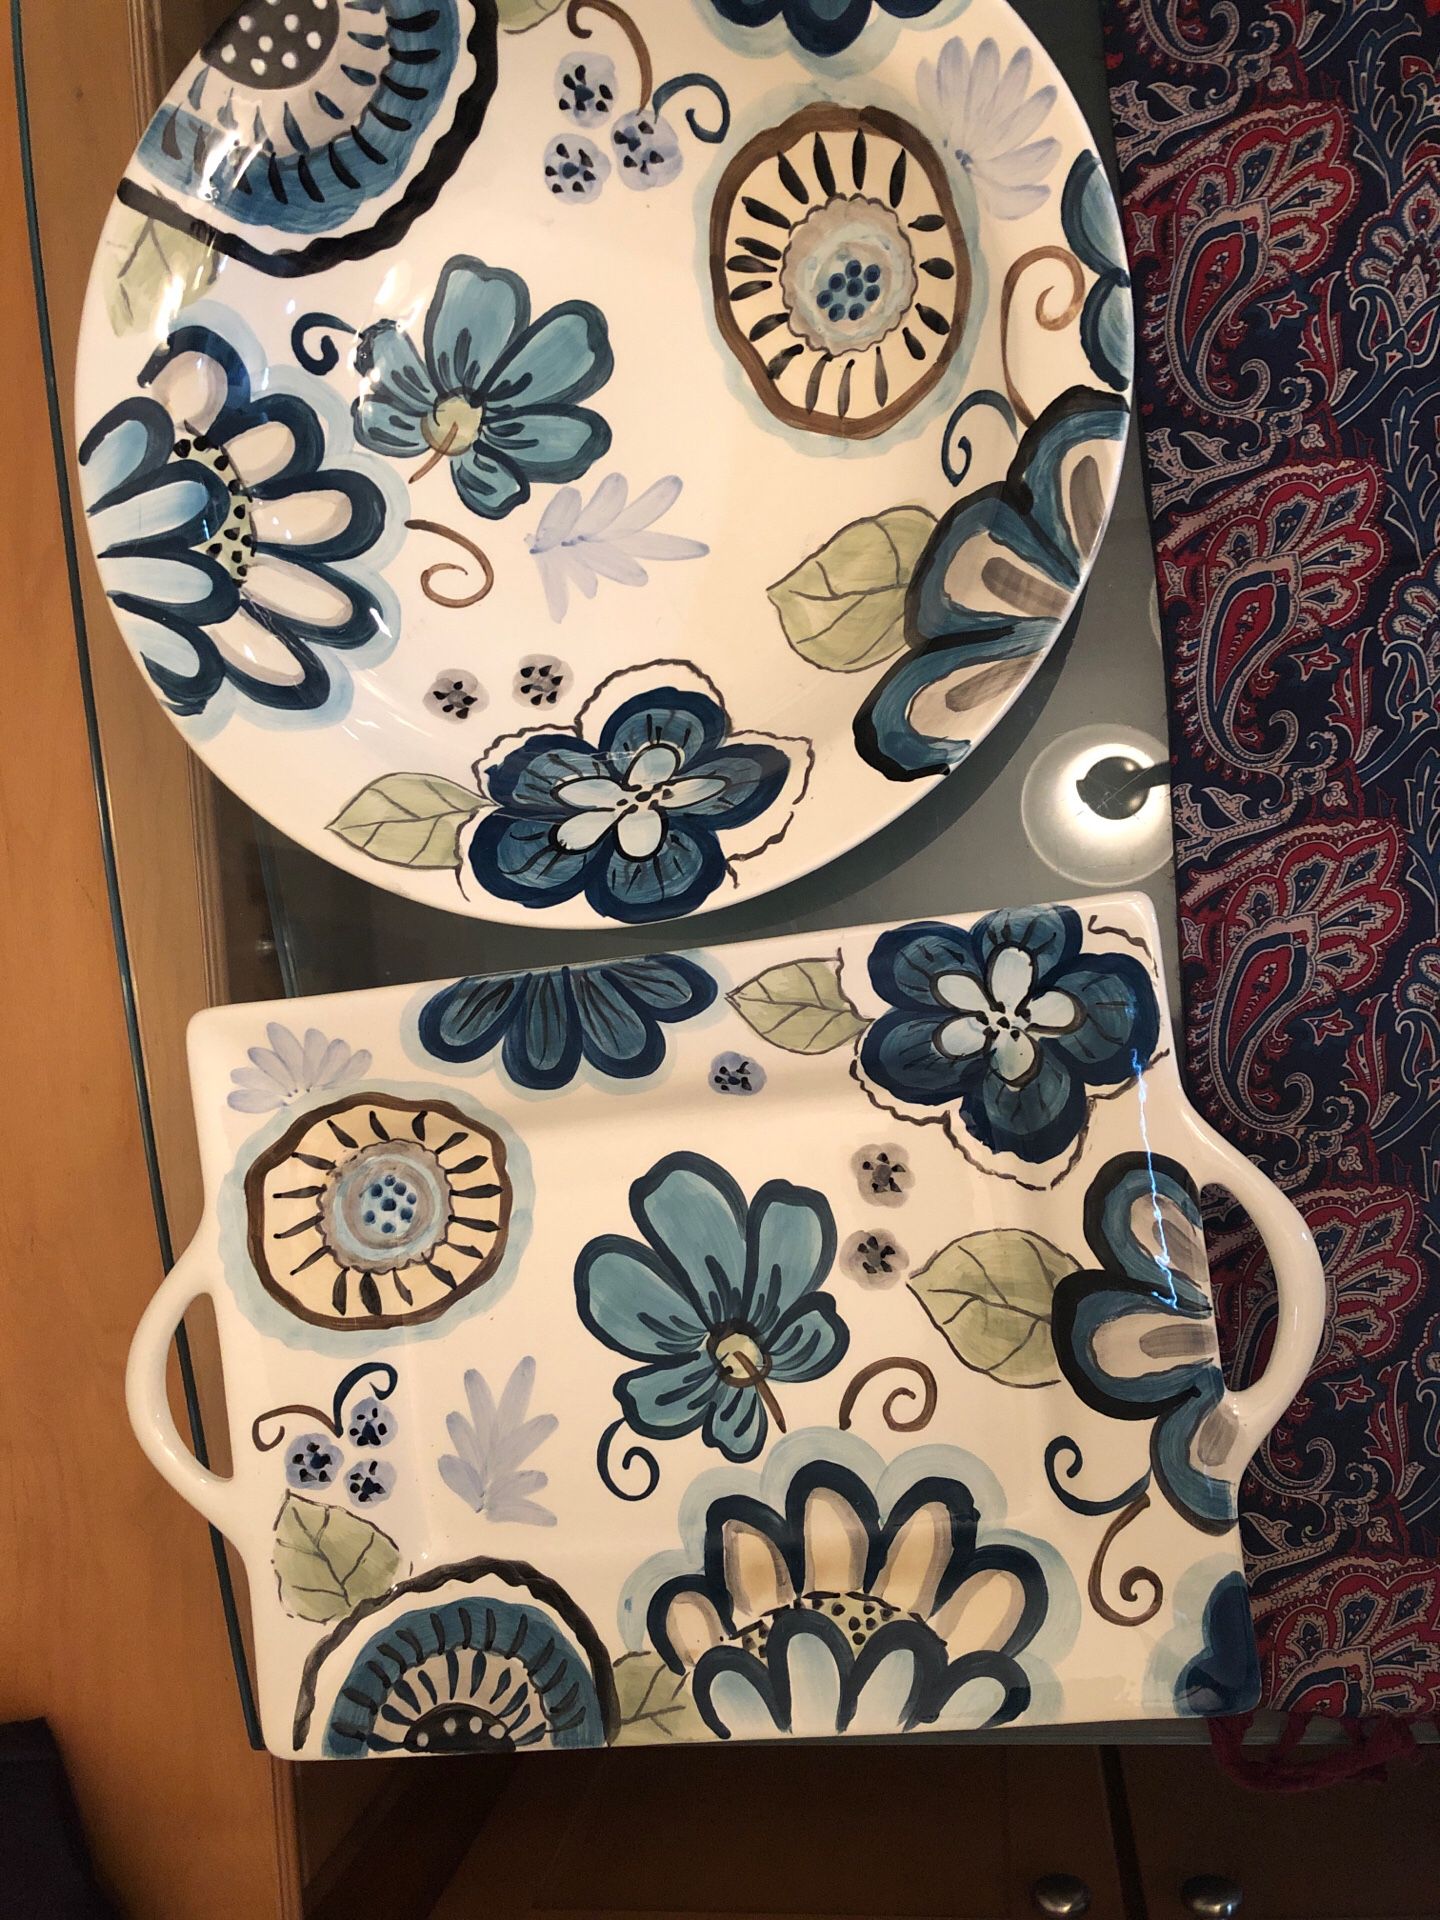 Platter and bowl from Home goods. New haven..